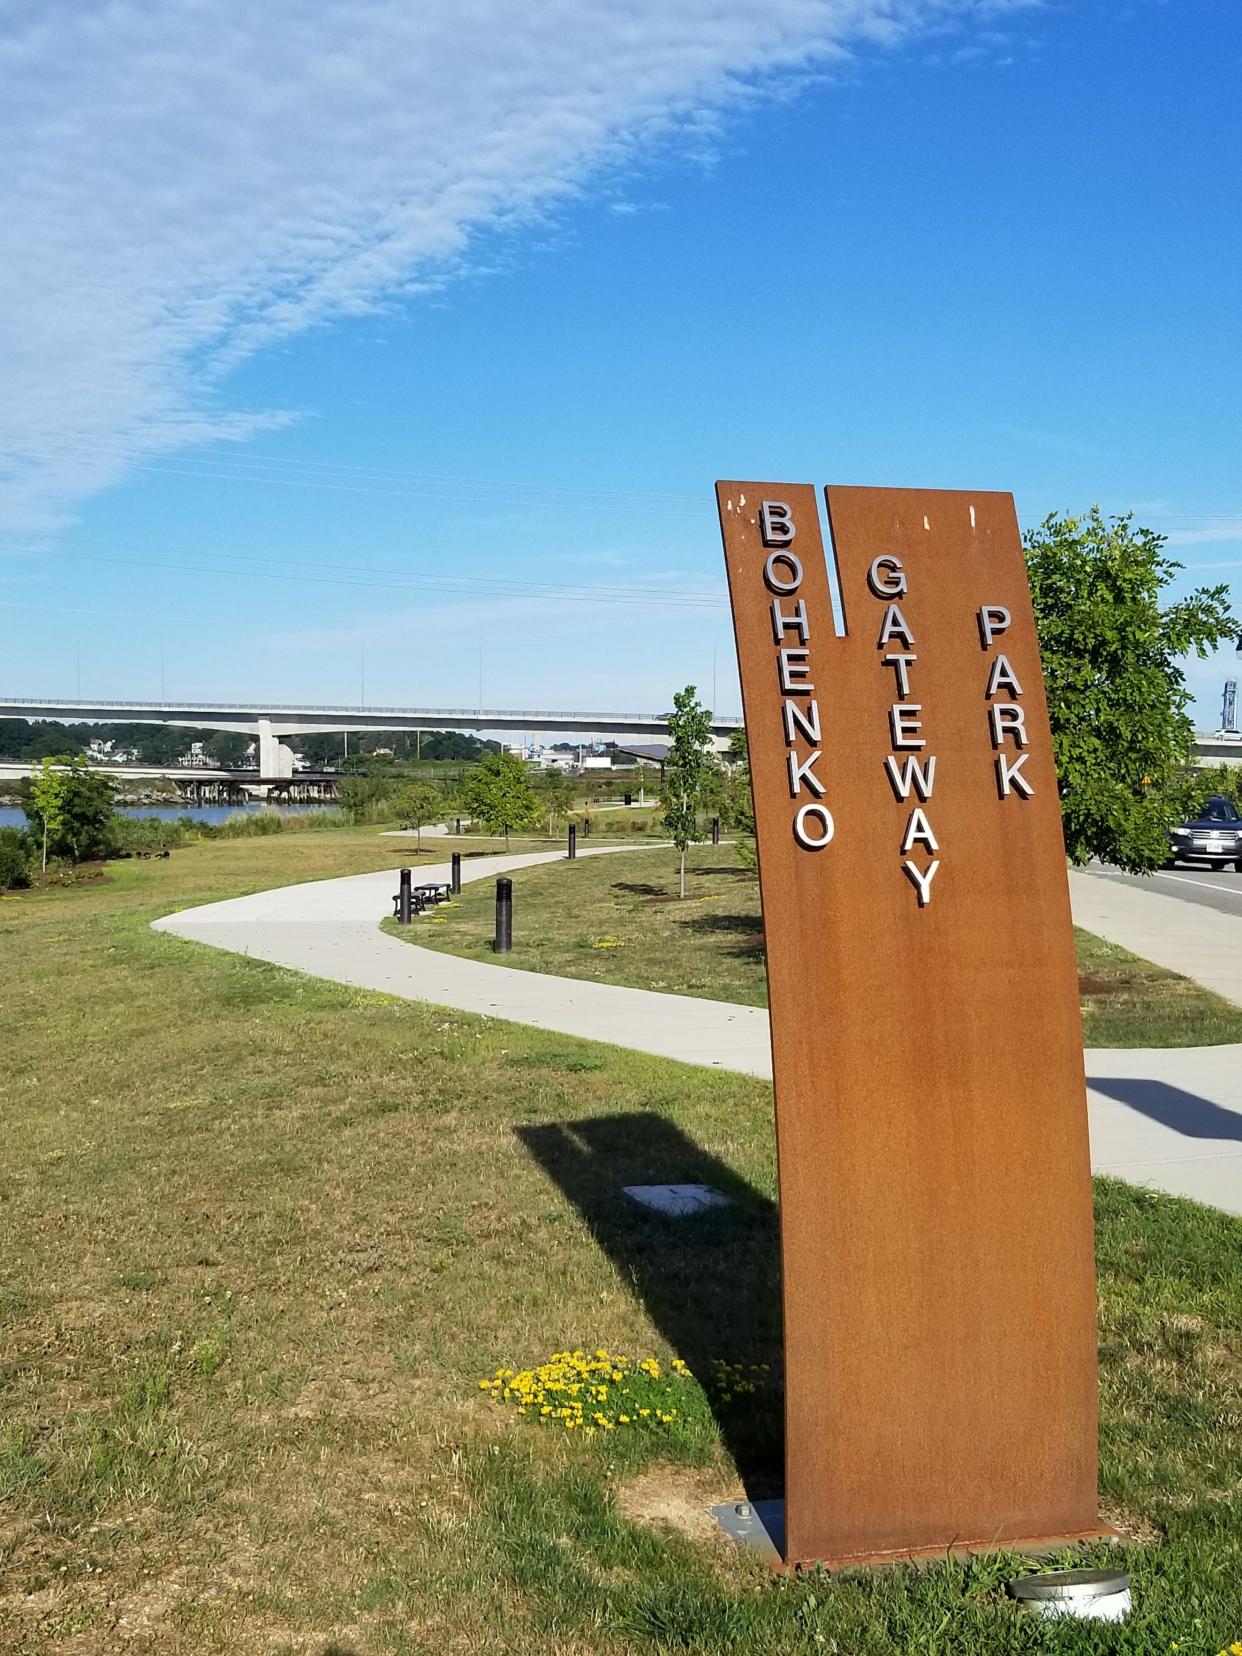 Portsmouth NH 400 is seeking artists' proposals and sponsors for a maritime-themed sculpture garden in Bohenko Gateway Park that will be a PNH400 Legacy project.